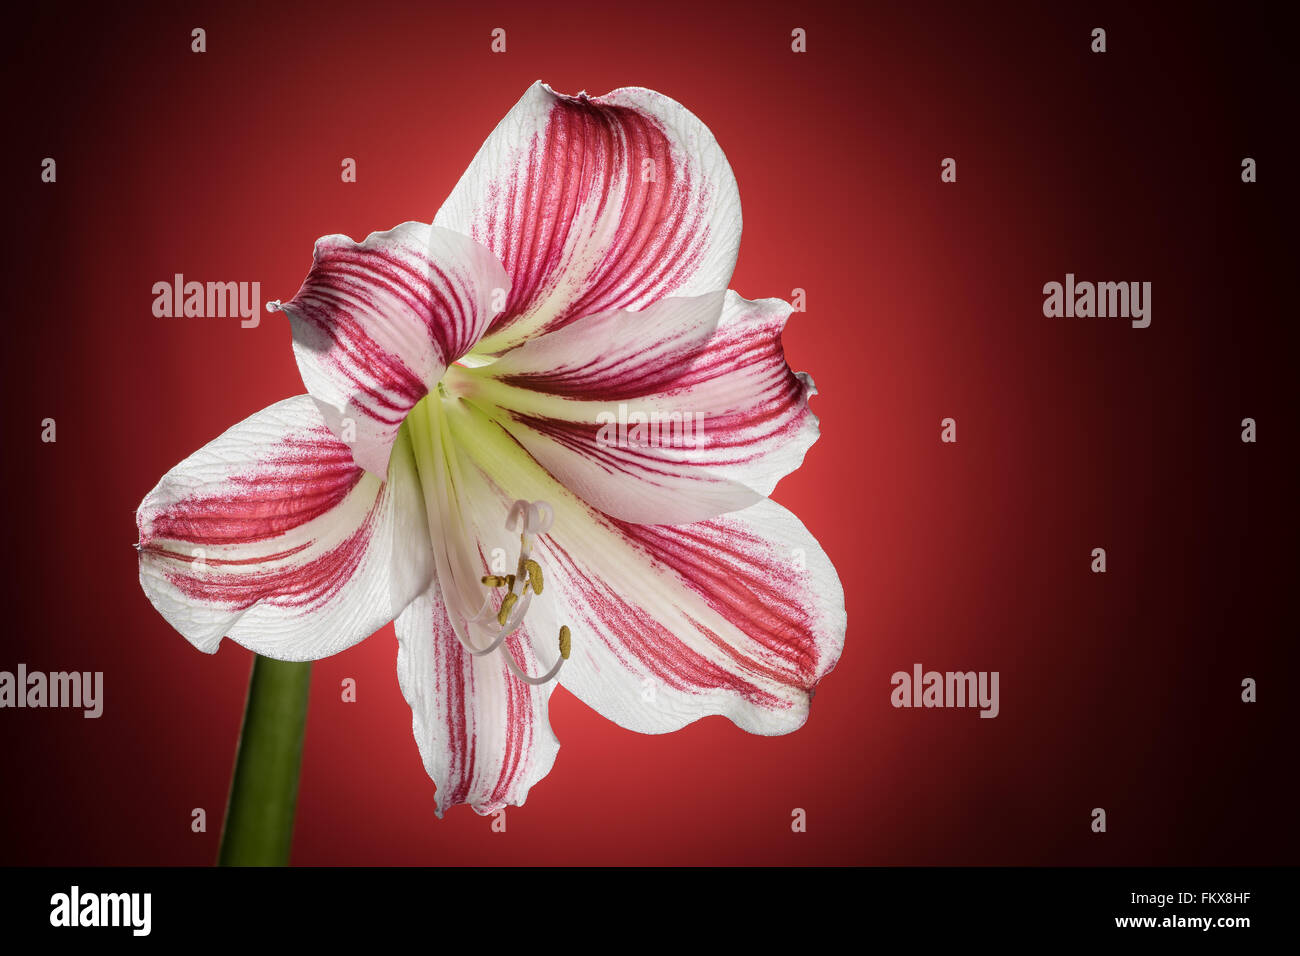 White amaryllis bloom with red stripes. Natural blooming flower blossom. Hippeastrum isolated on the red background. Celebration Stock Photo